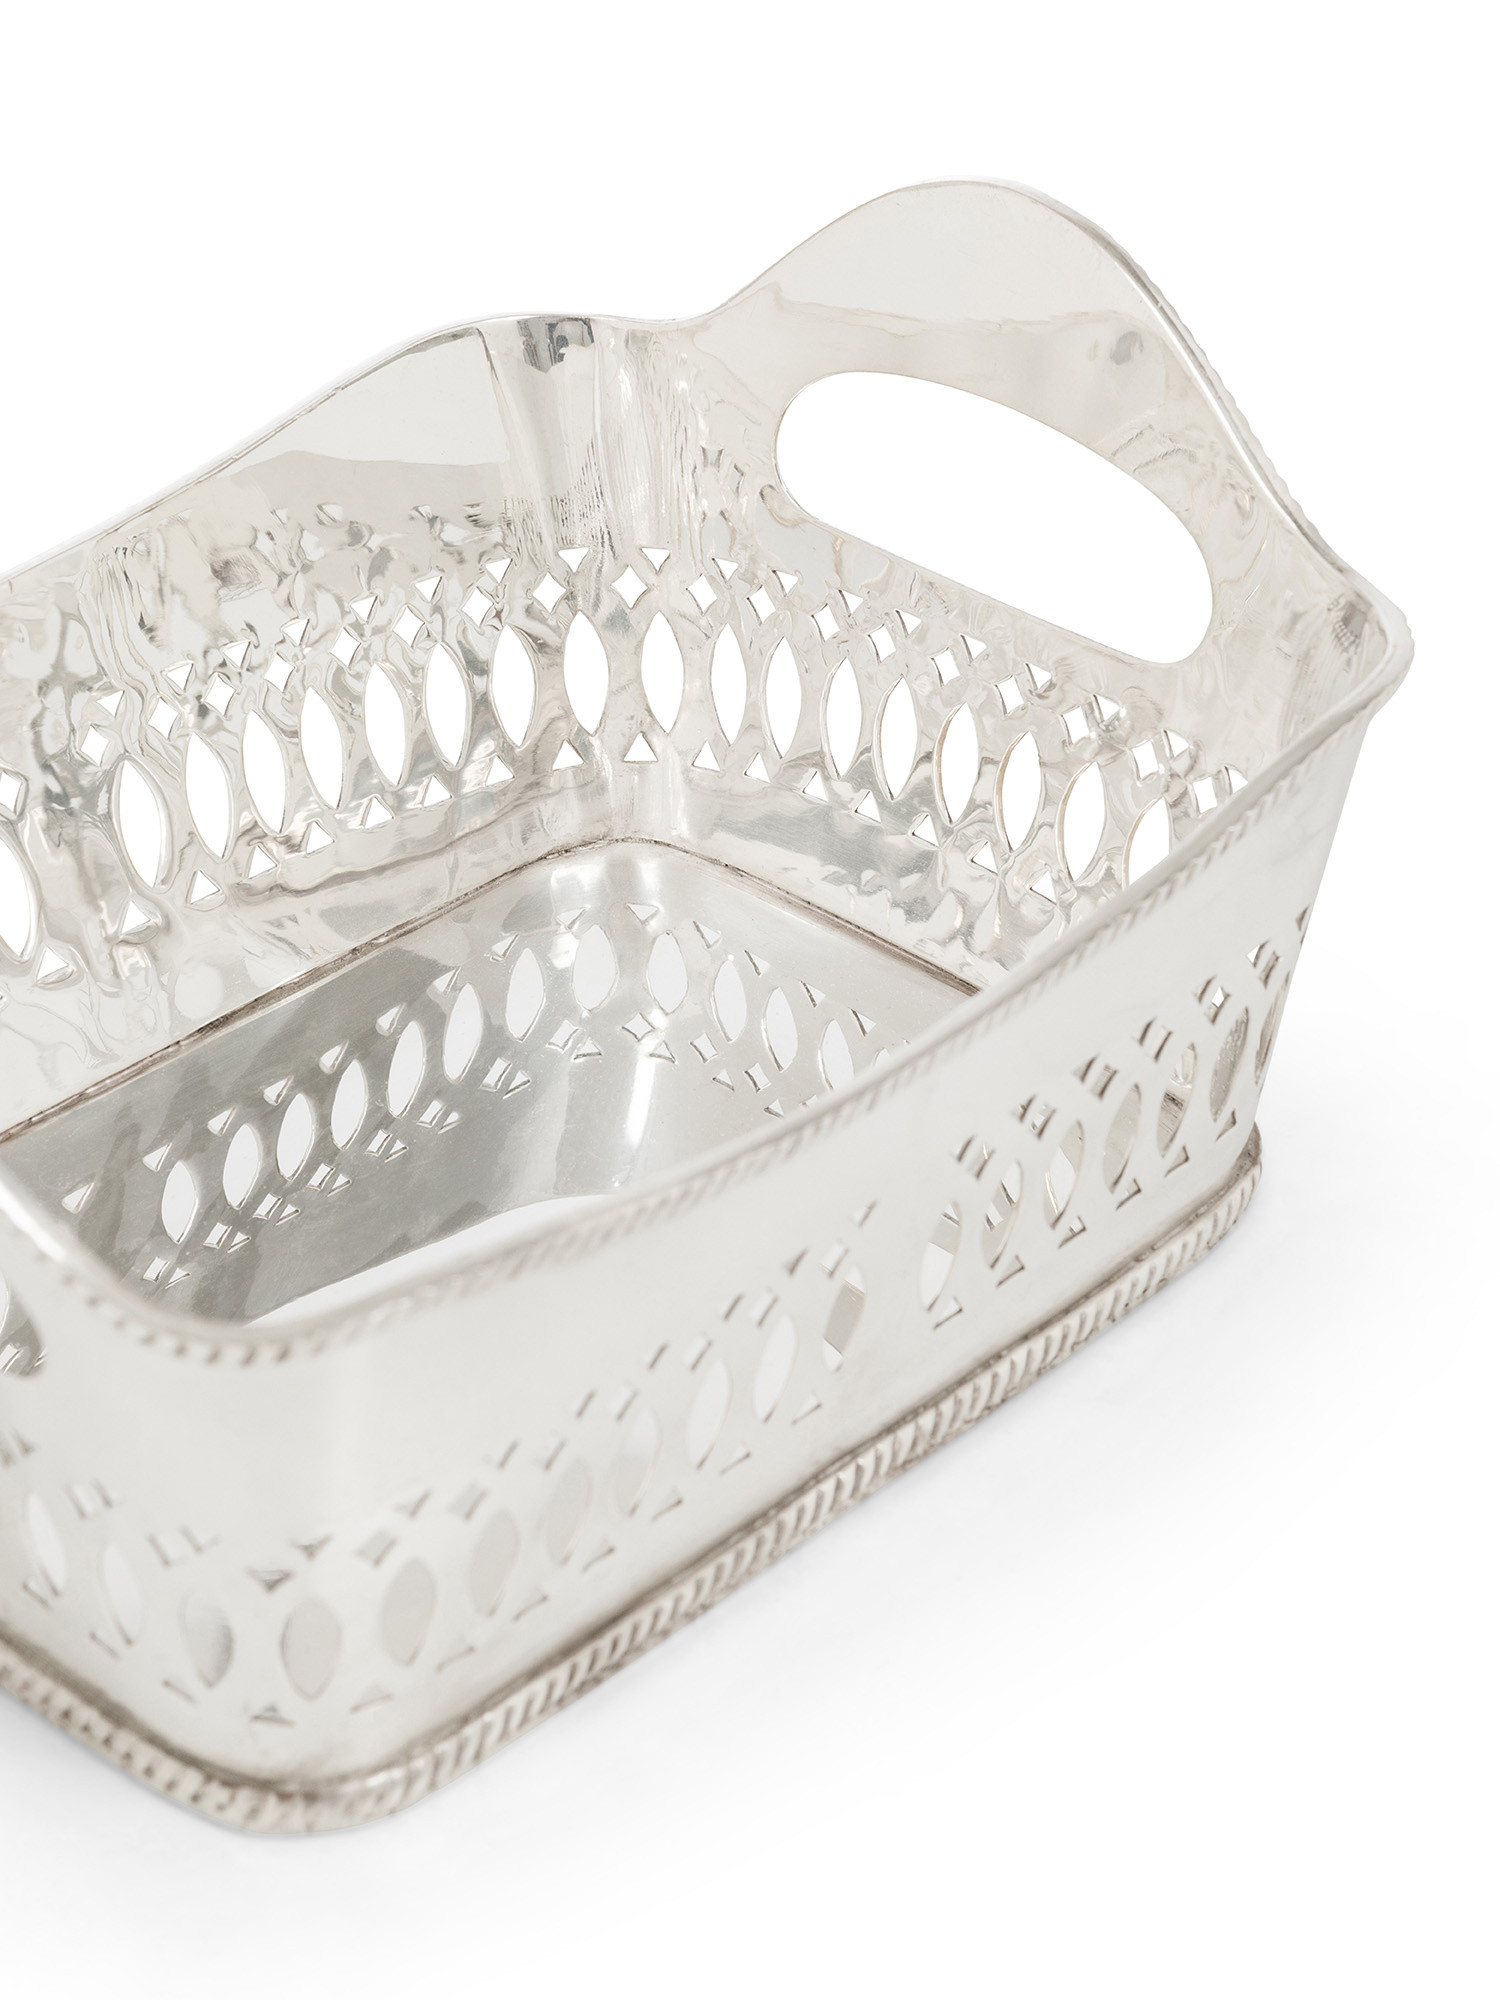 Basket with 2 silver plated handles, Silver Grey, large image number 1